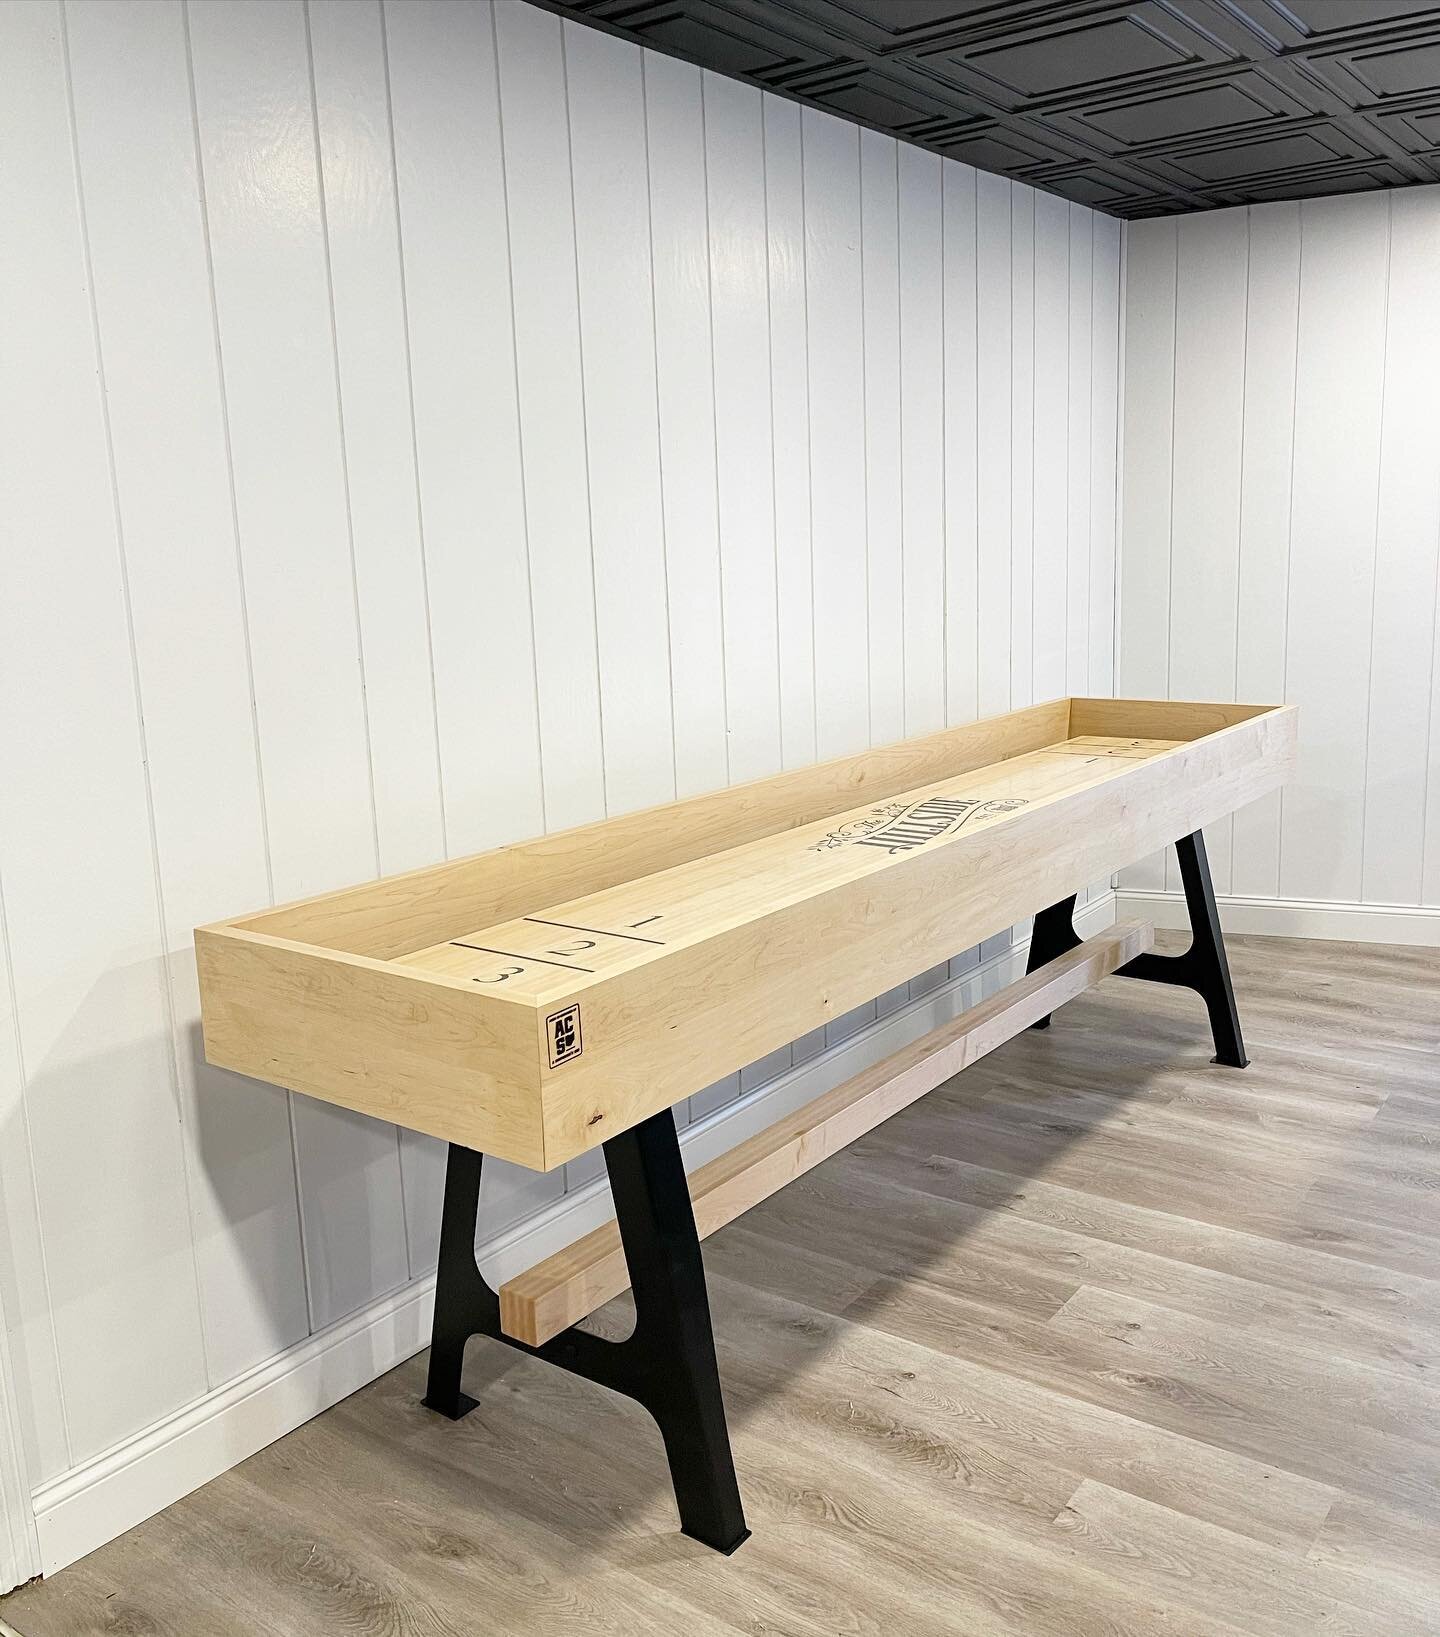 Our shuffleboard table was installed today by the team at @a_carpenters_son. It sits in our basement lounge and has some cool unique details to it! Swipe right to see!